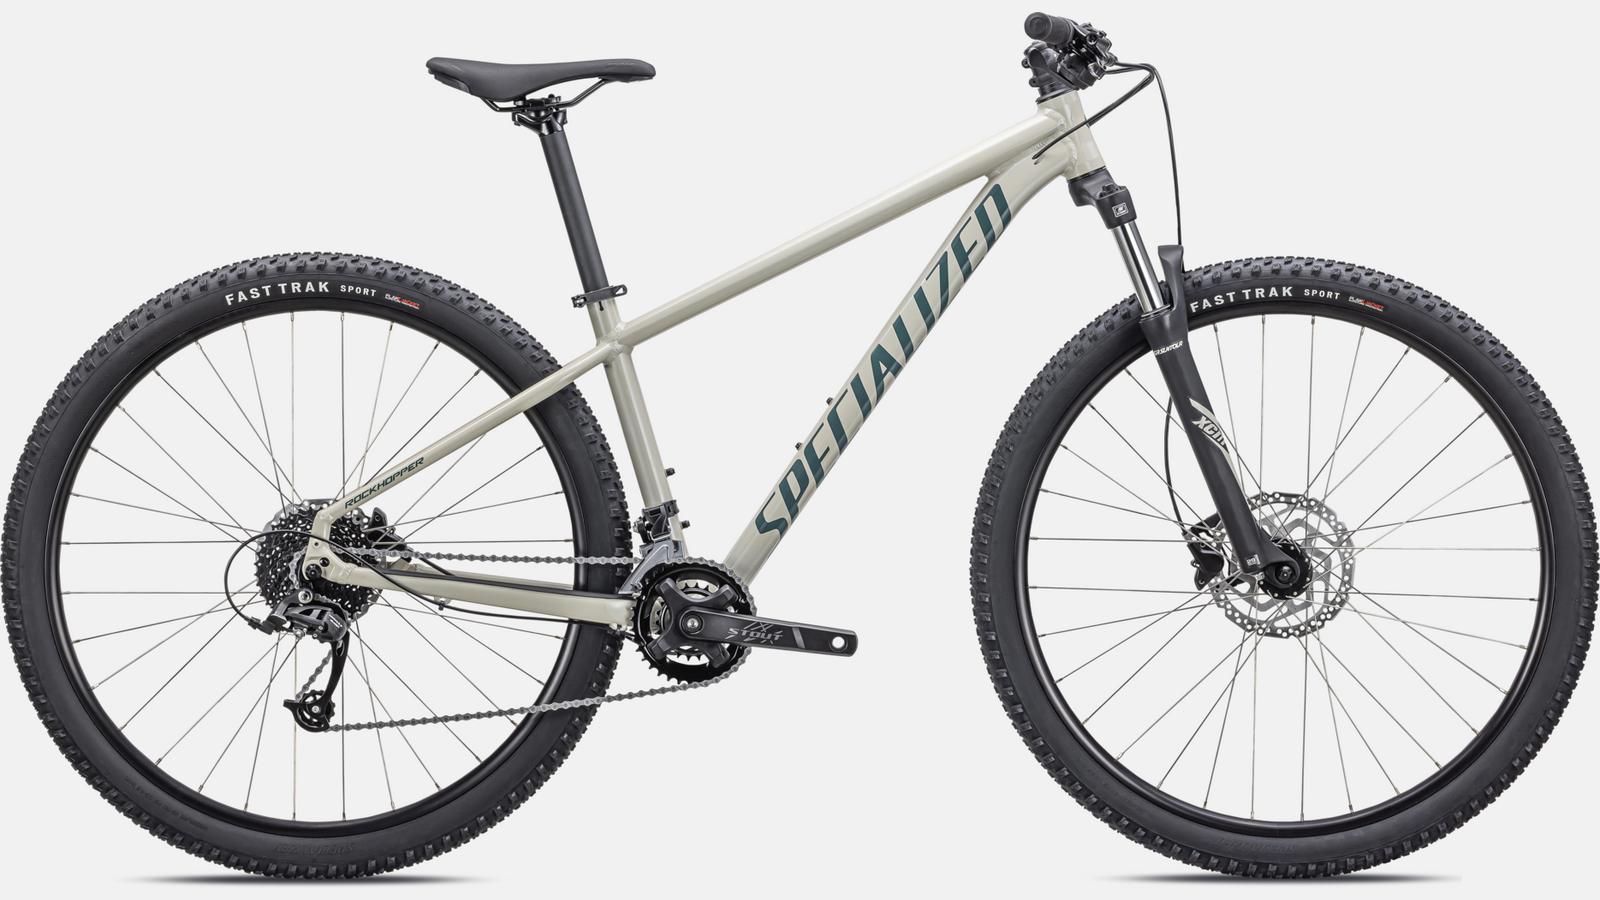 Paint for 2022 Specialized Rockhopper Sport 29 - Gloss White Mountains